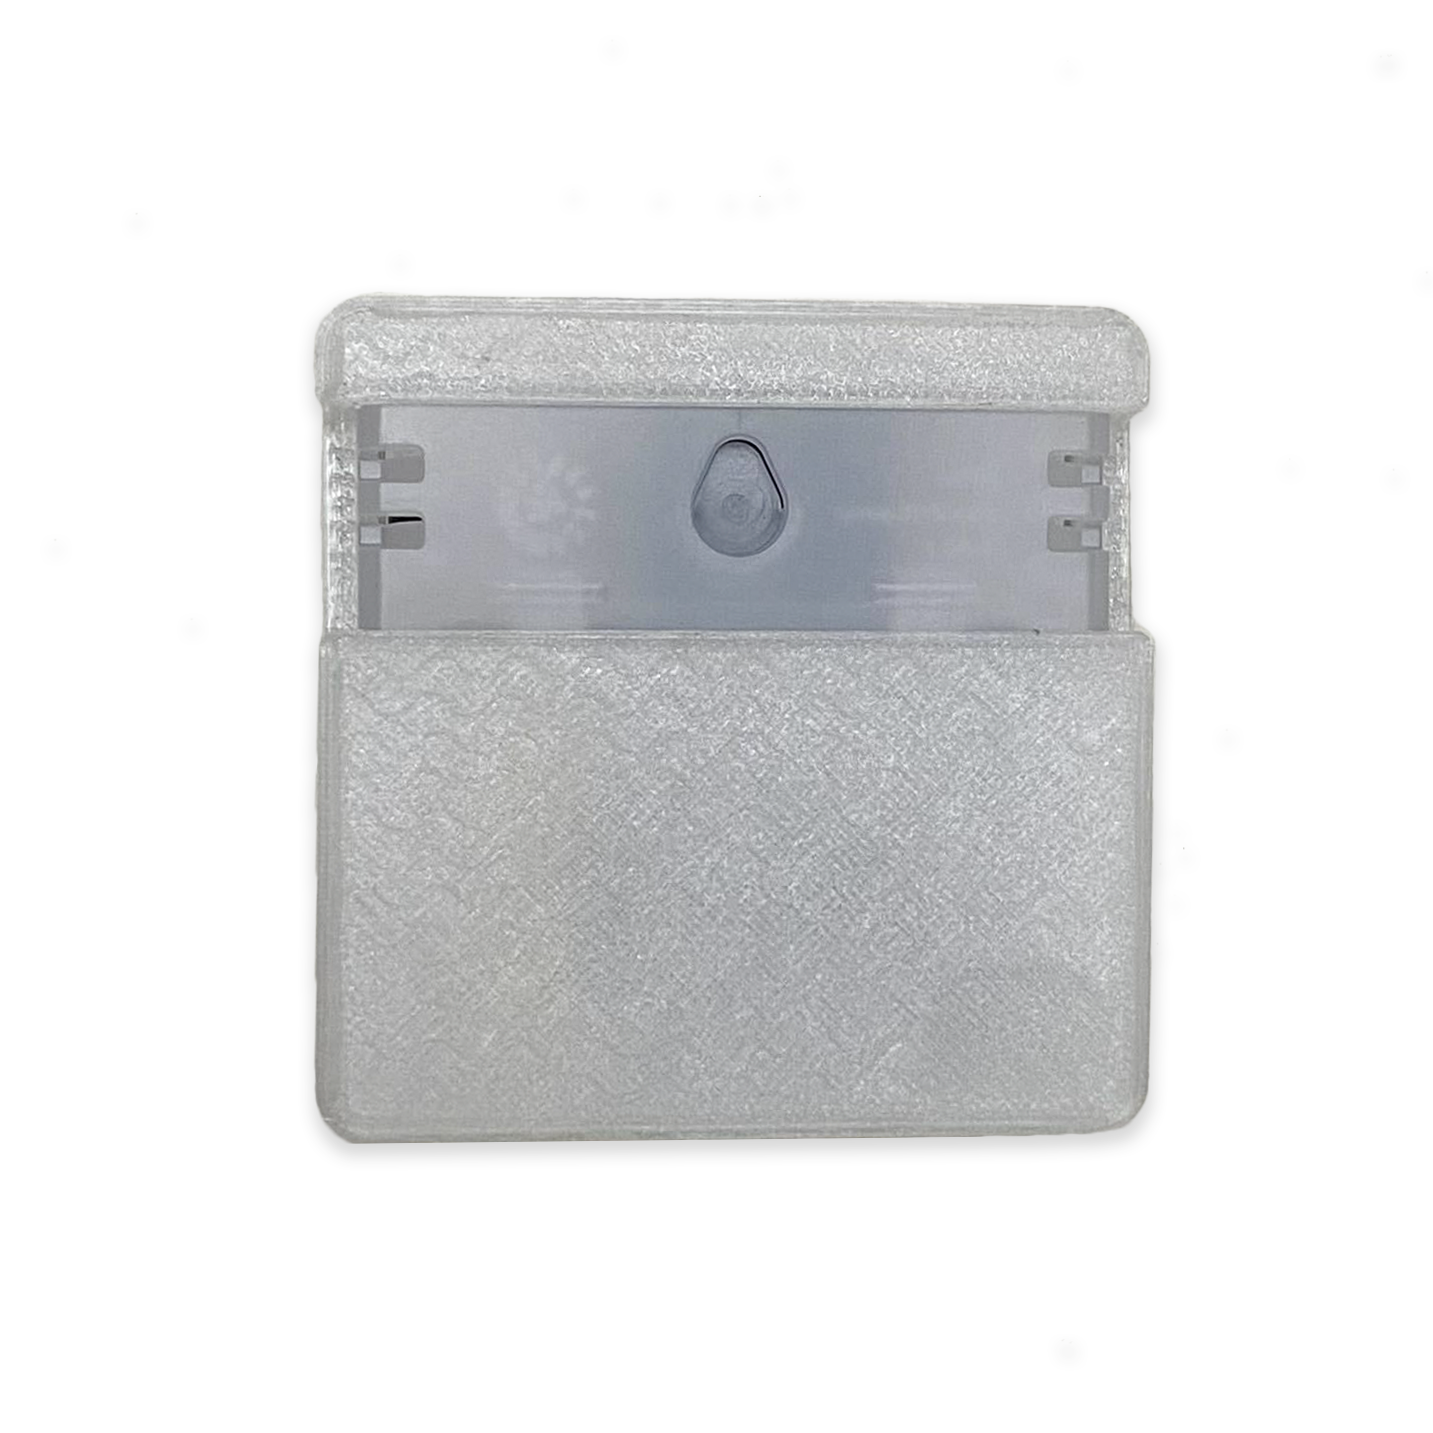 Picture of back of translucent case, with opening for mounting